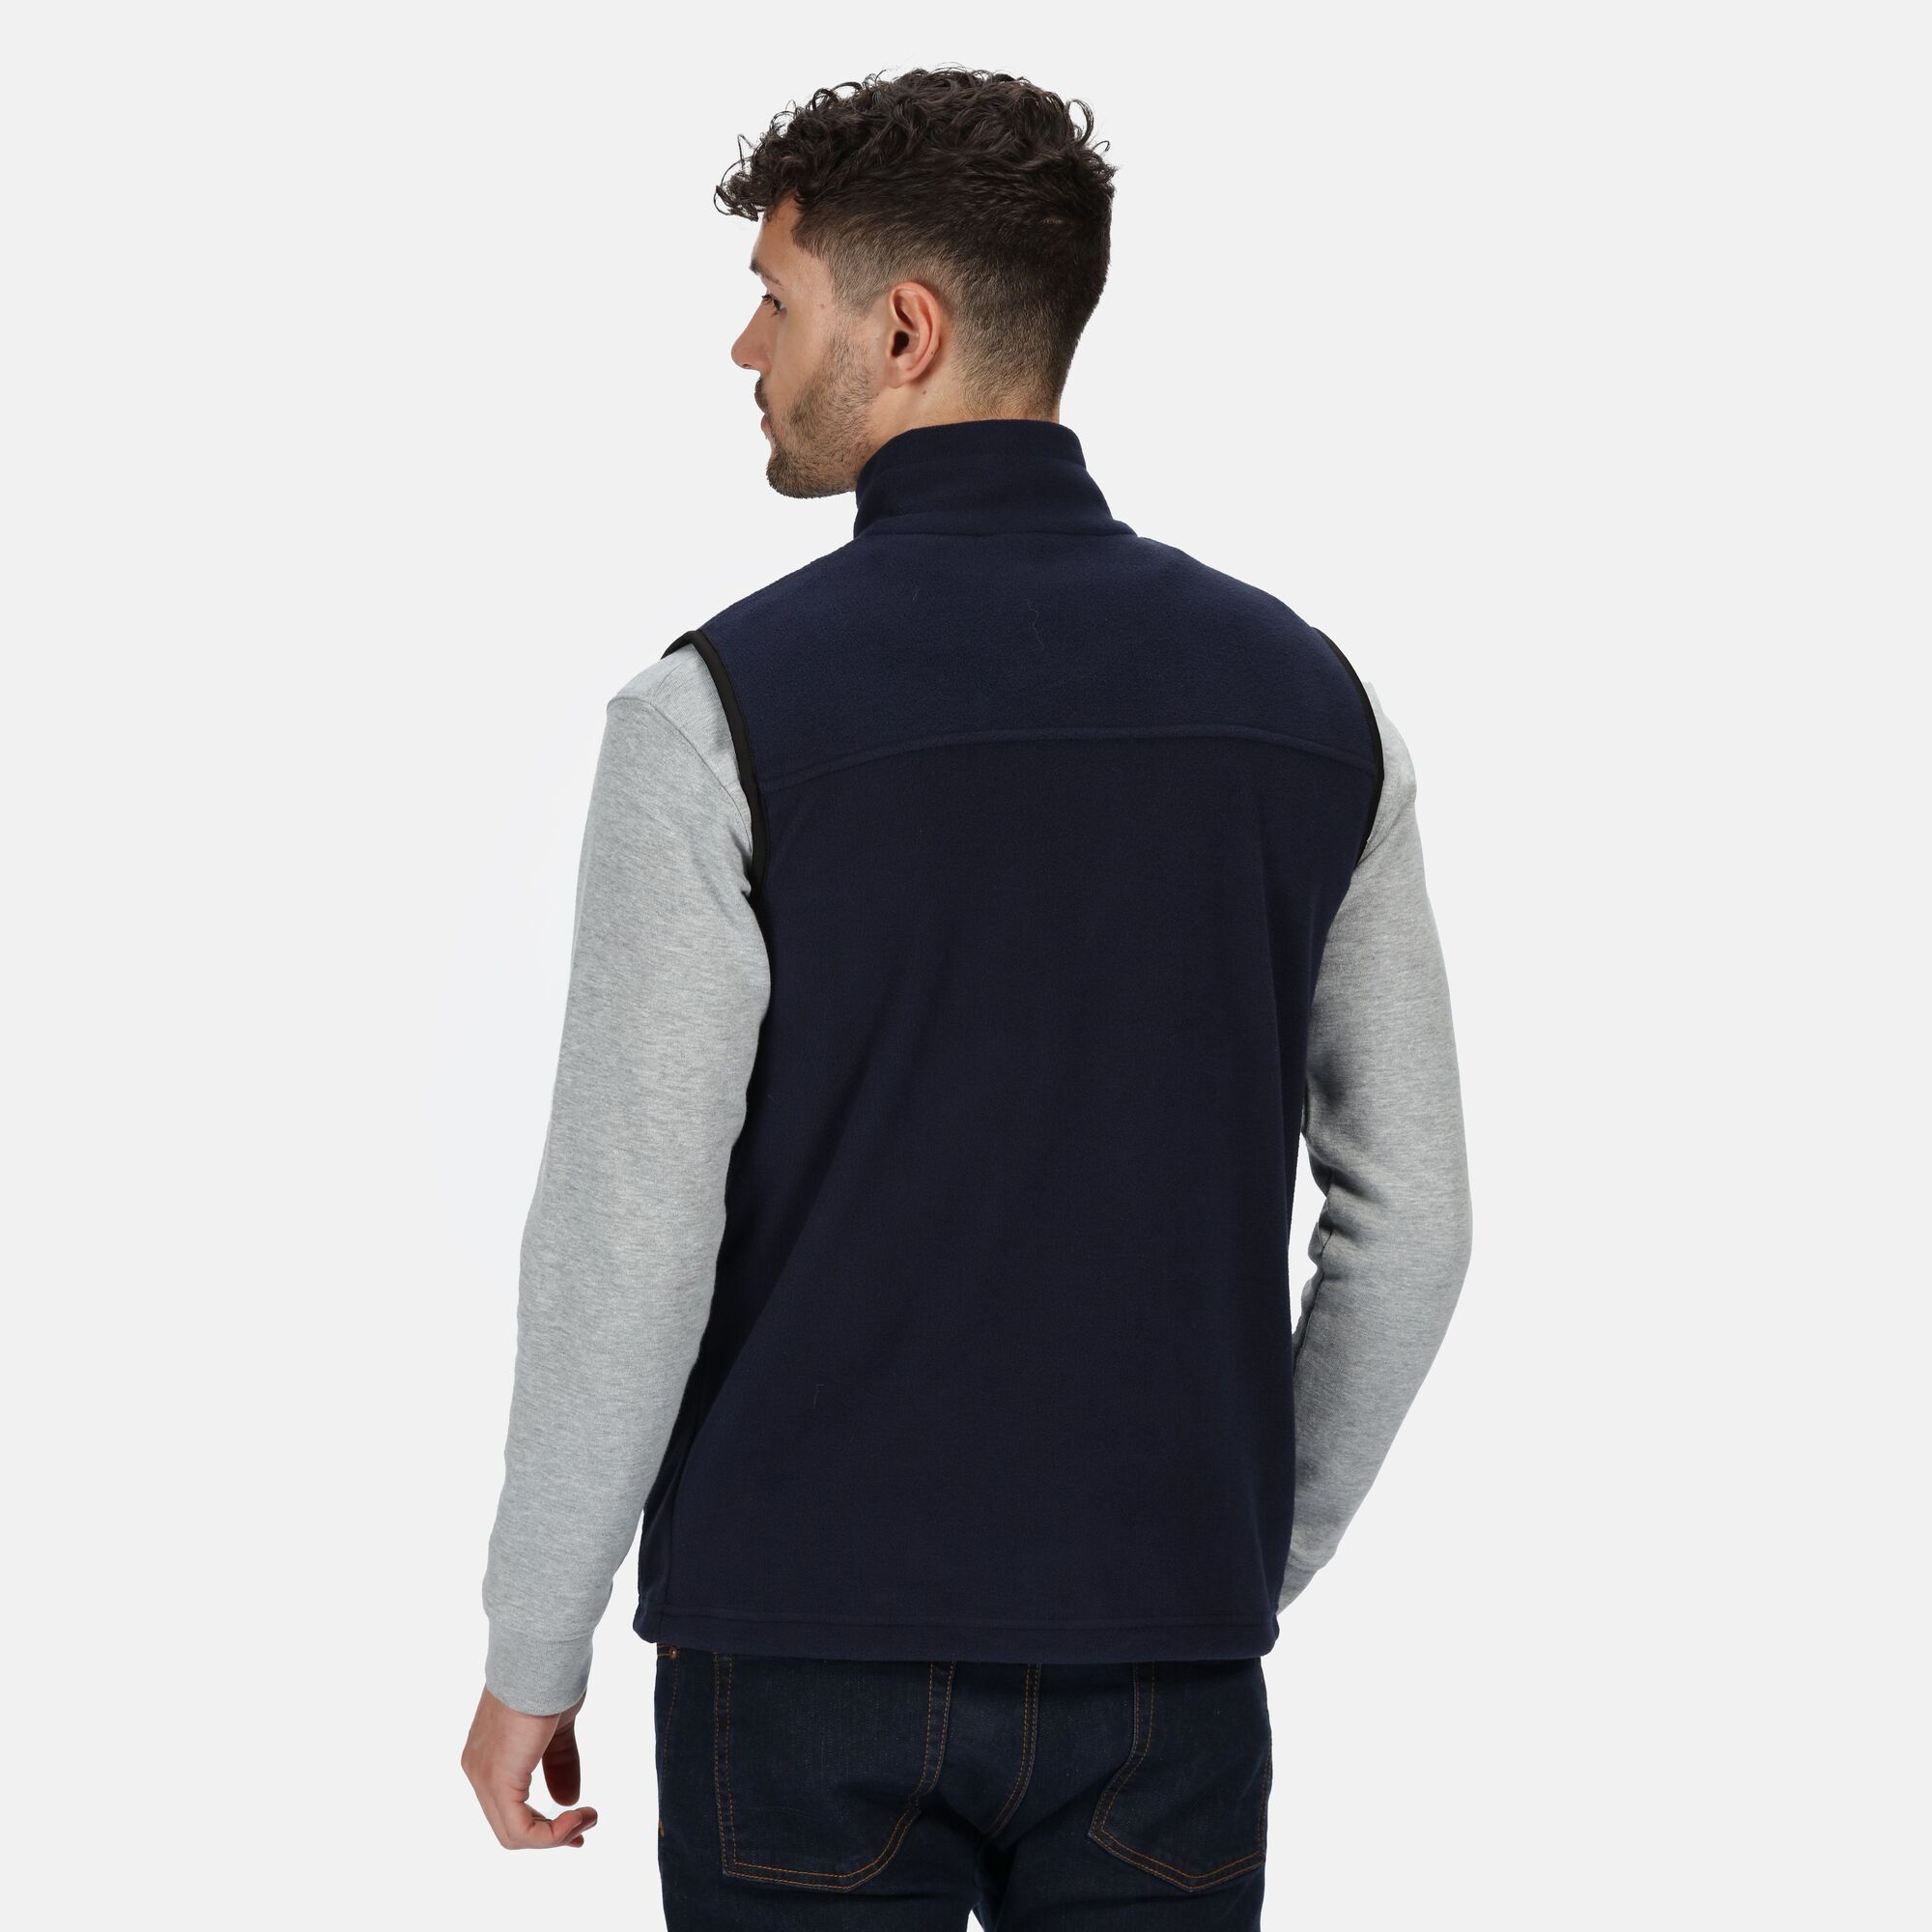 100% Polyester. Elasticated bound armholes. Adjustable shockcord hem. Interactive - ideal to be worn with:. Gibson jacket. Vertex jacket. 2 zipped lower pockets. Symmetry Fleece - lighter weight/greater warmth. Weight: 250g/m. Fabric: 250 series anti-pill Symmetry fleece. S (38: To Fit (ins)). M (40: To Fit (ins)). L (42: To Fit (ins)). XL (44: To Fit (ins)). 2XL (47: To Fit (ins)).